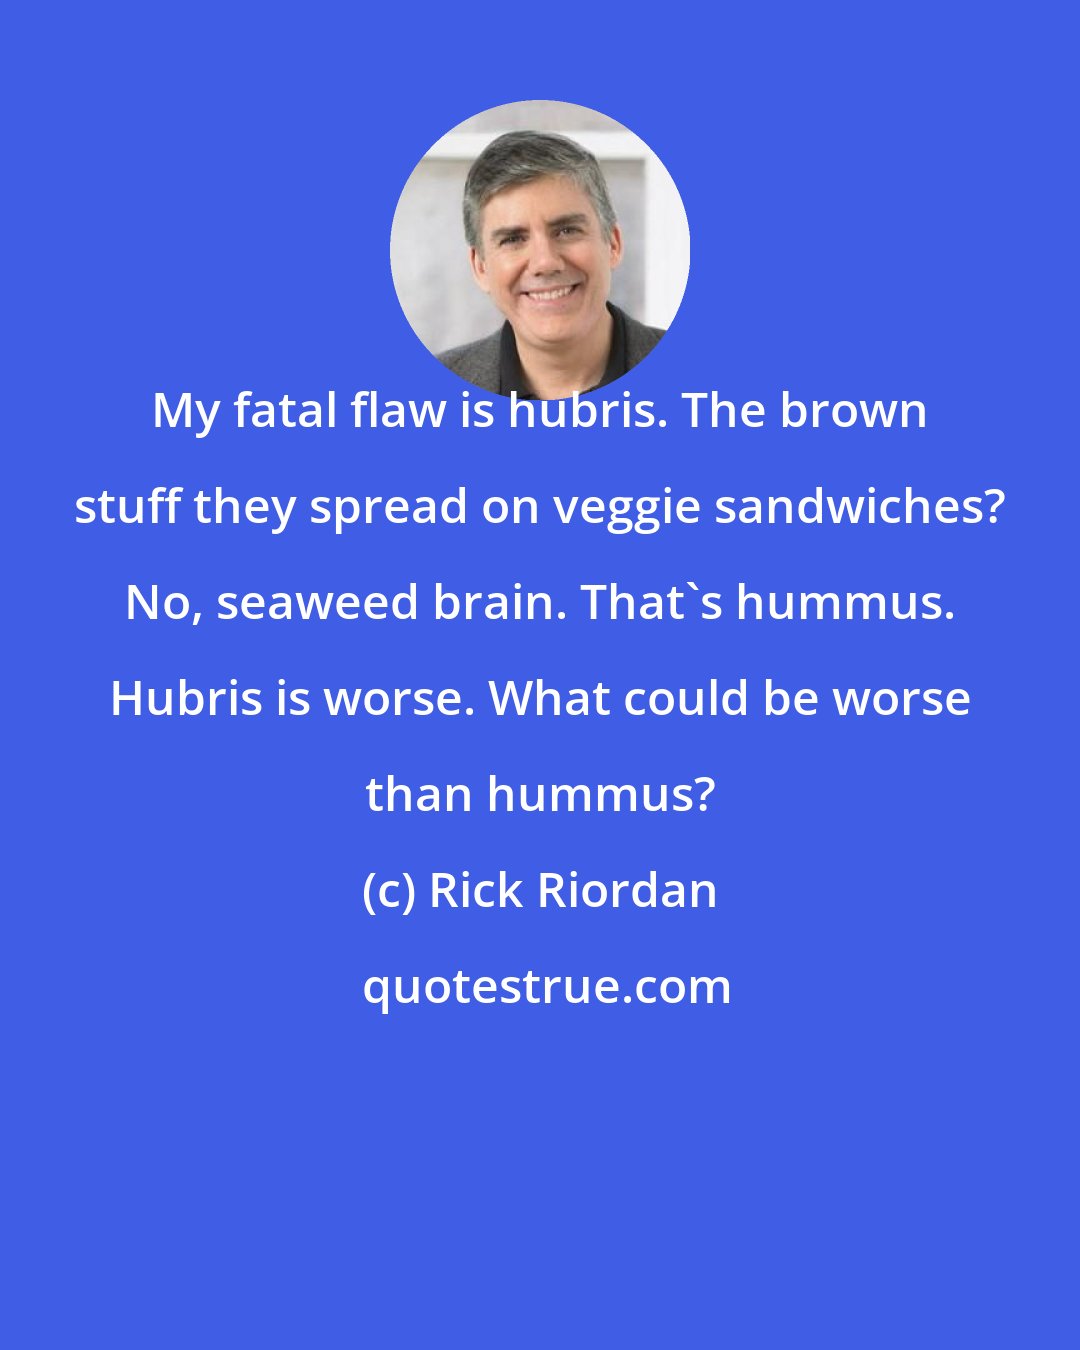 Rick Riordan: My fatal flaw is hubris. The brown stuff they spread on veggie sandwiches? No, seaweed brain. That's hummus. Hubris is worse. What could be worse than hummus?